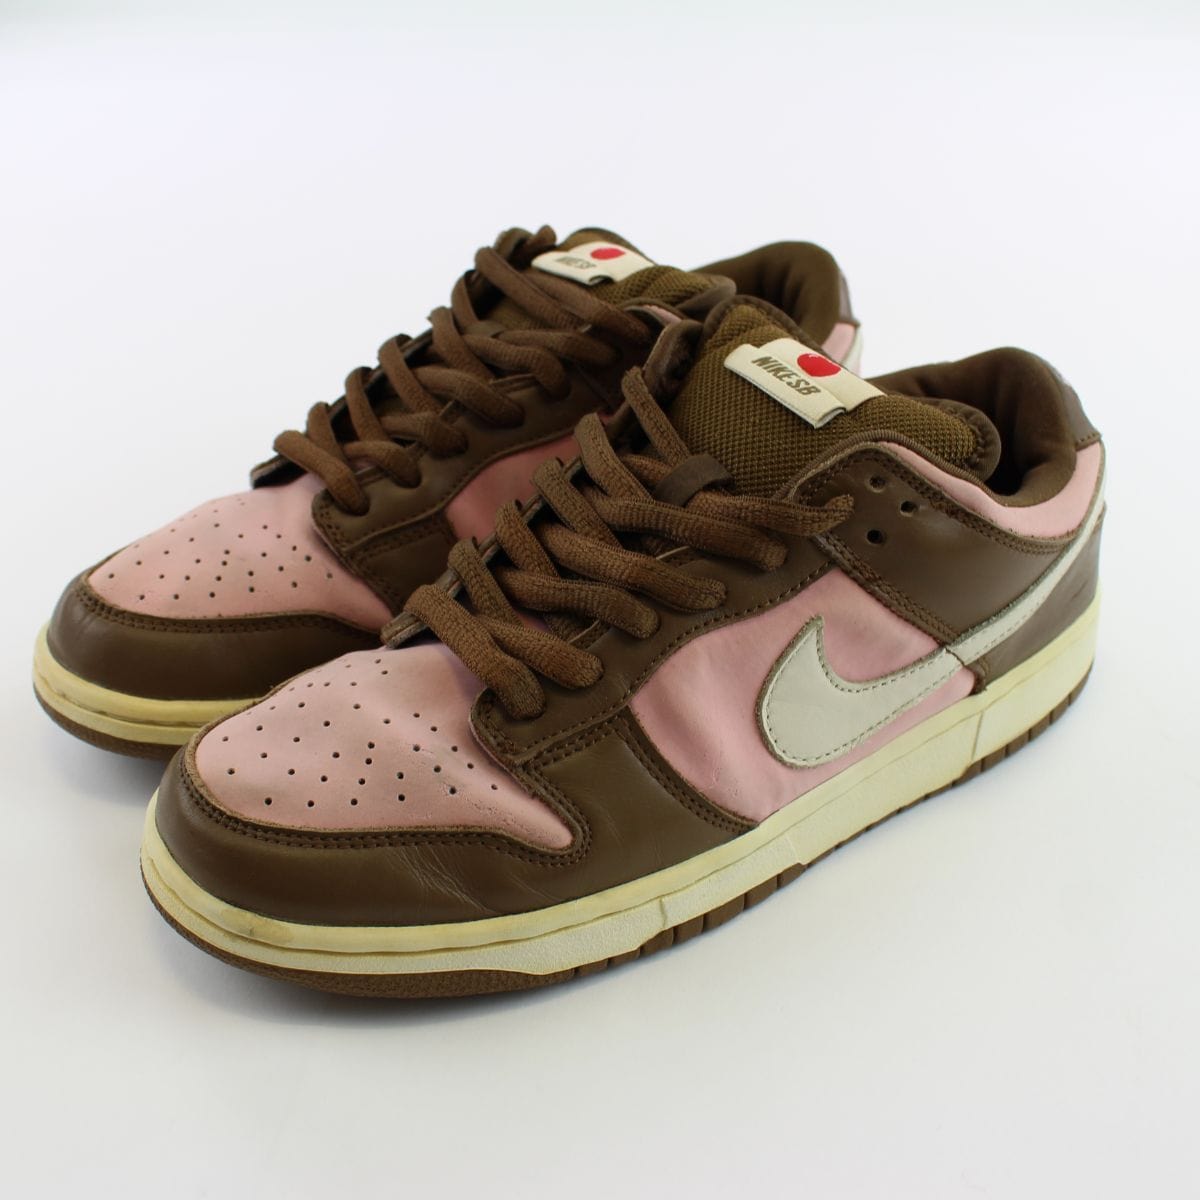 pink and brown nike sb low